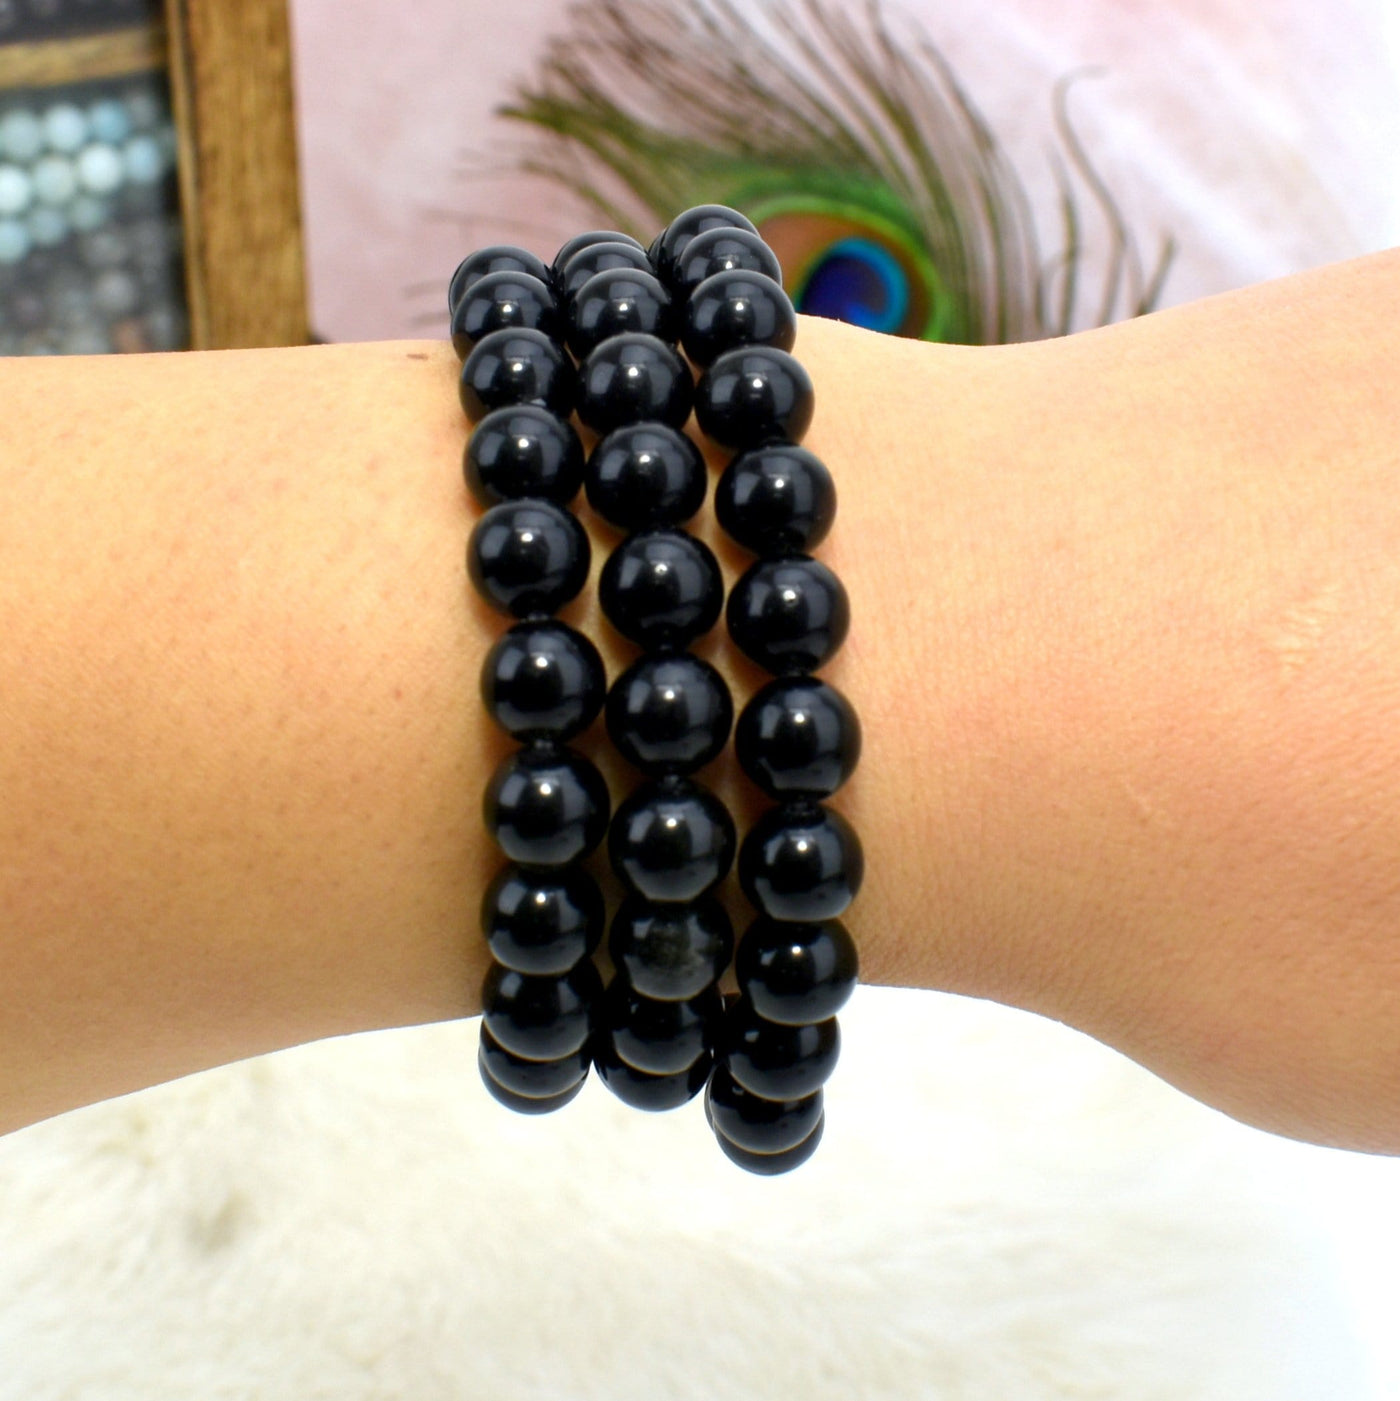 8mm round bead bracelet on wrist for size reference 